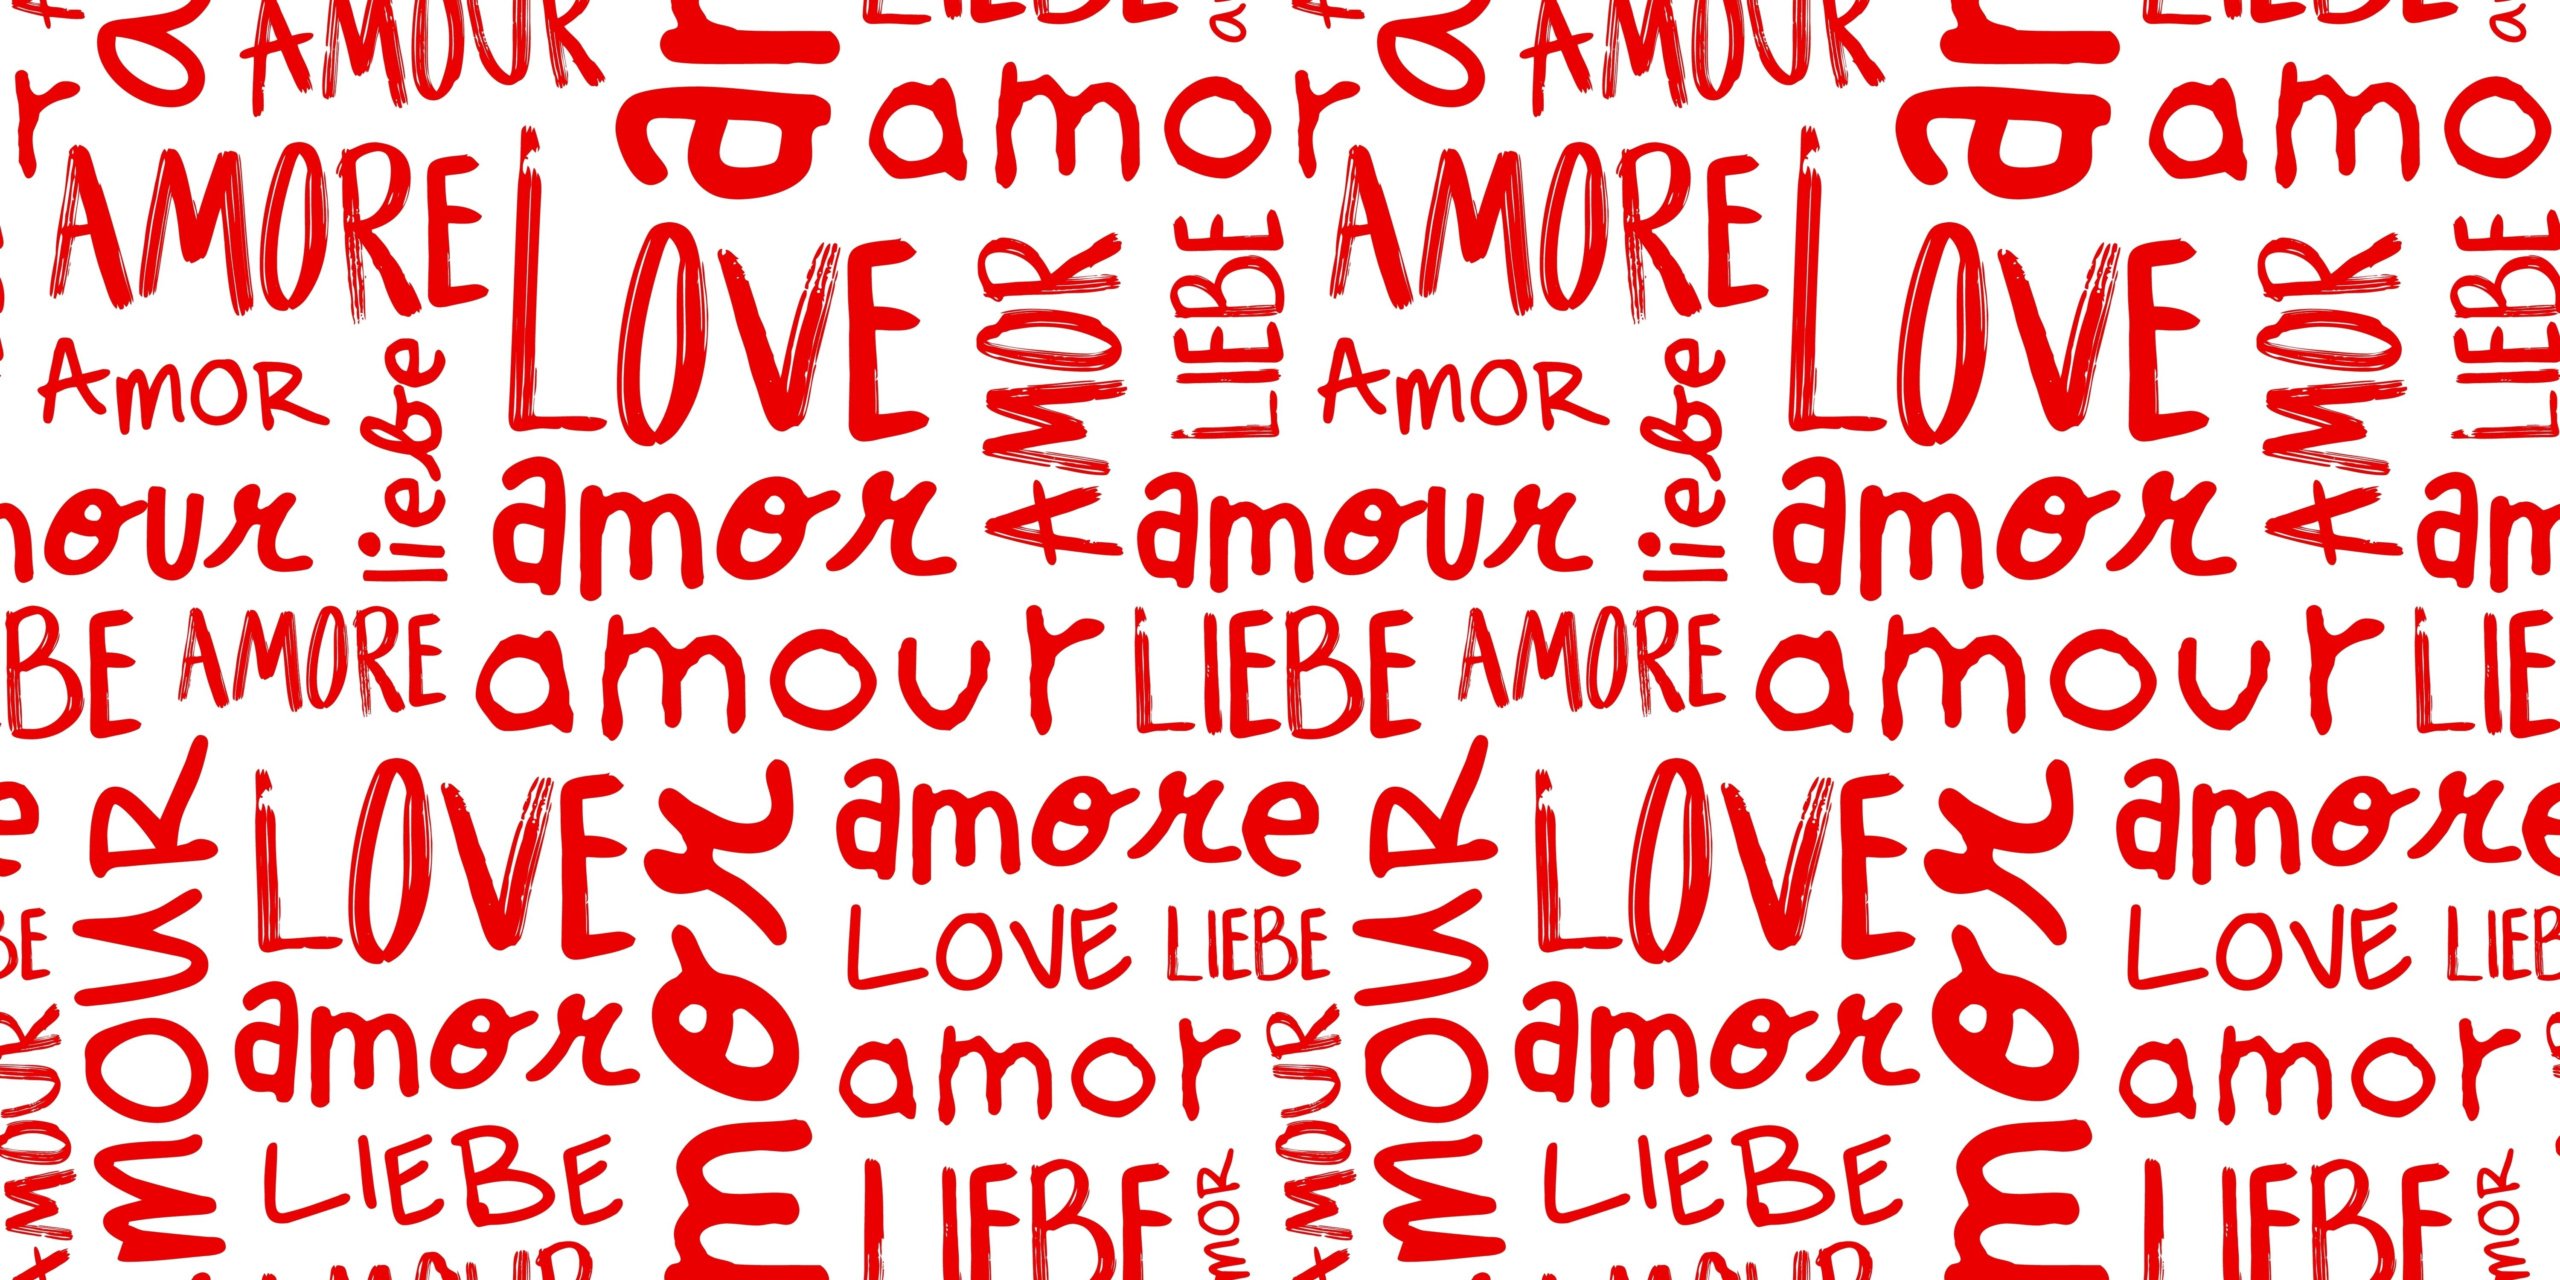 'I love you' in different languages